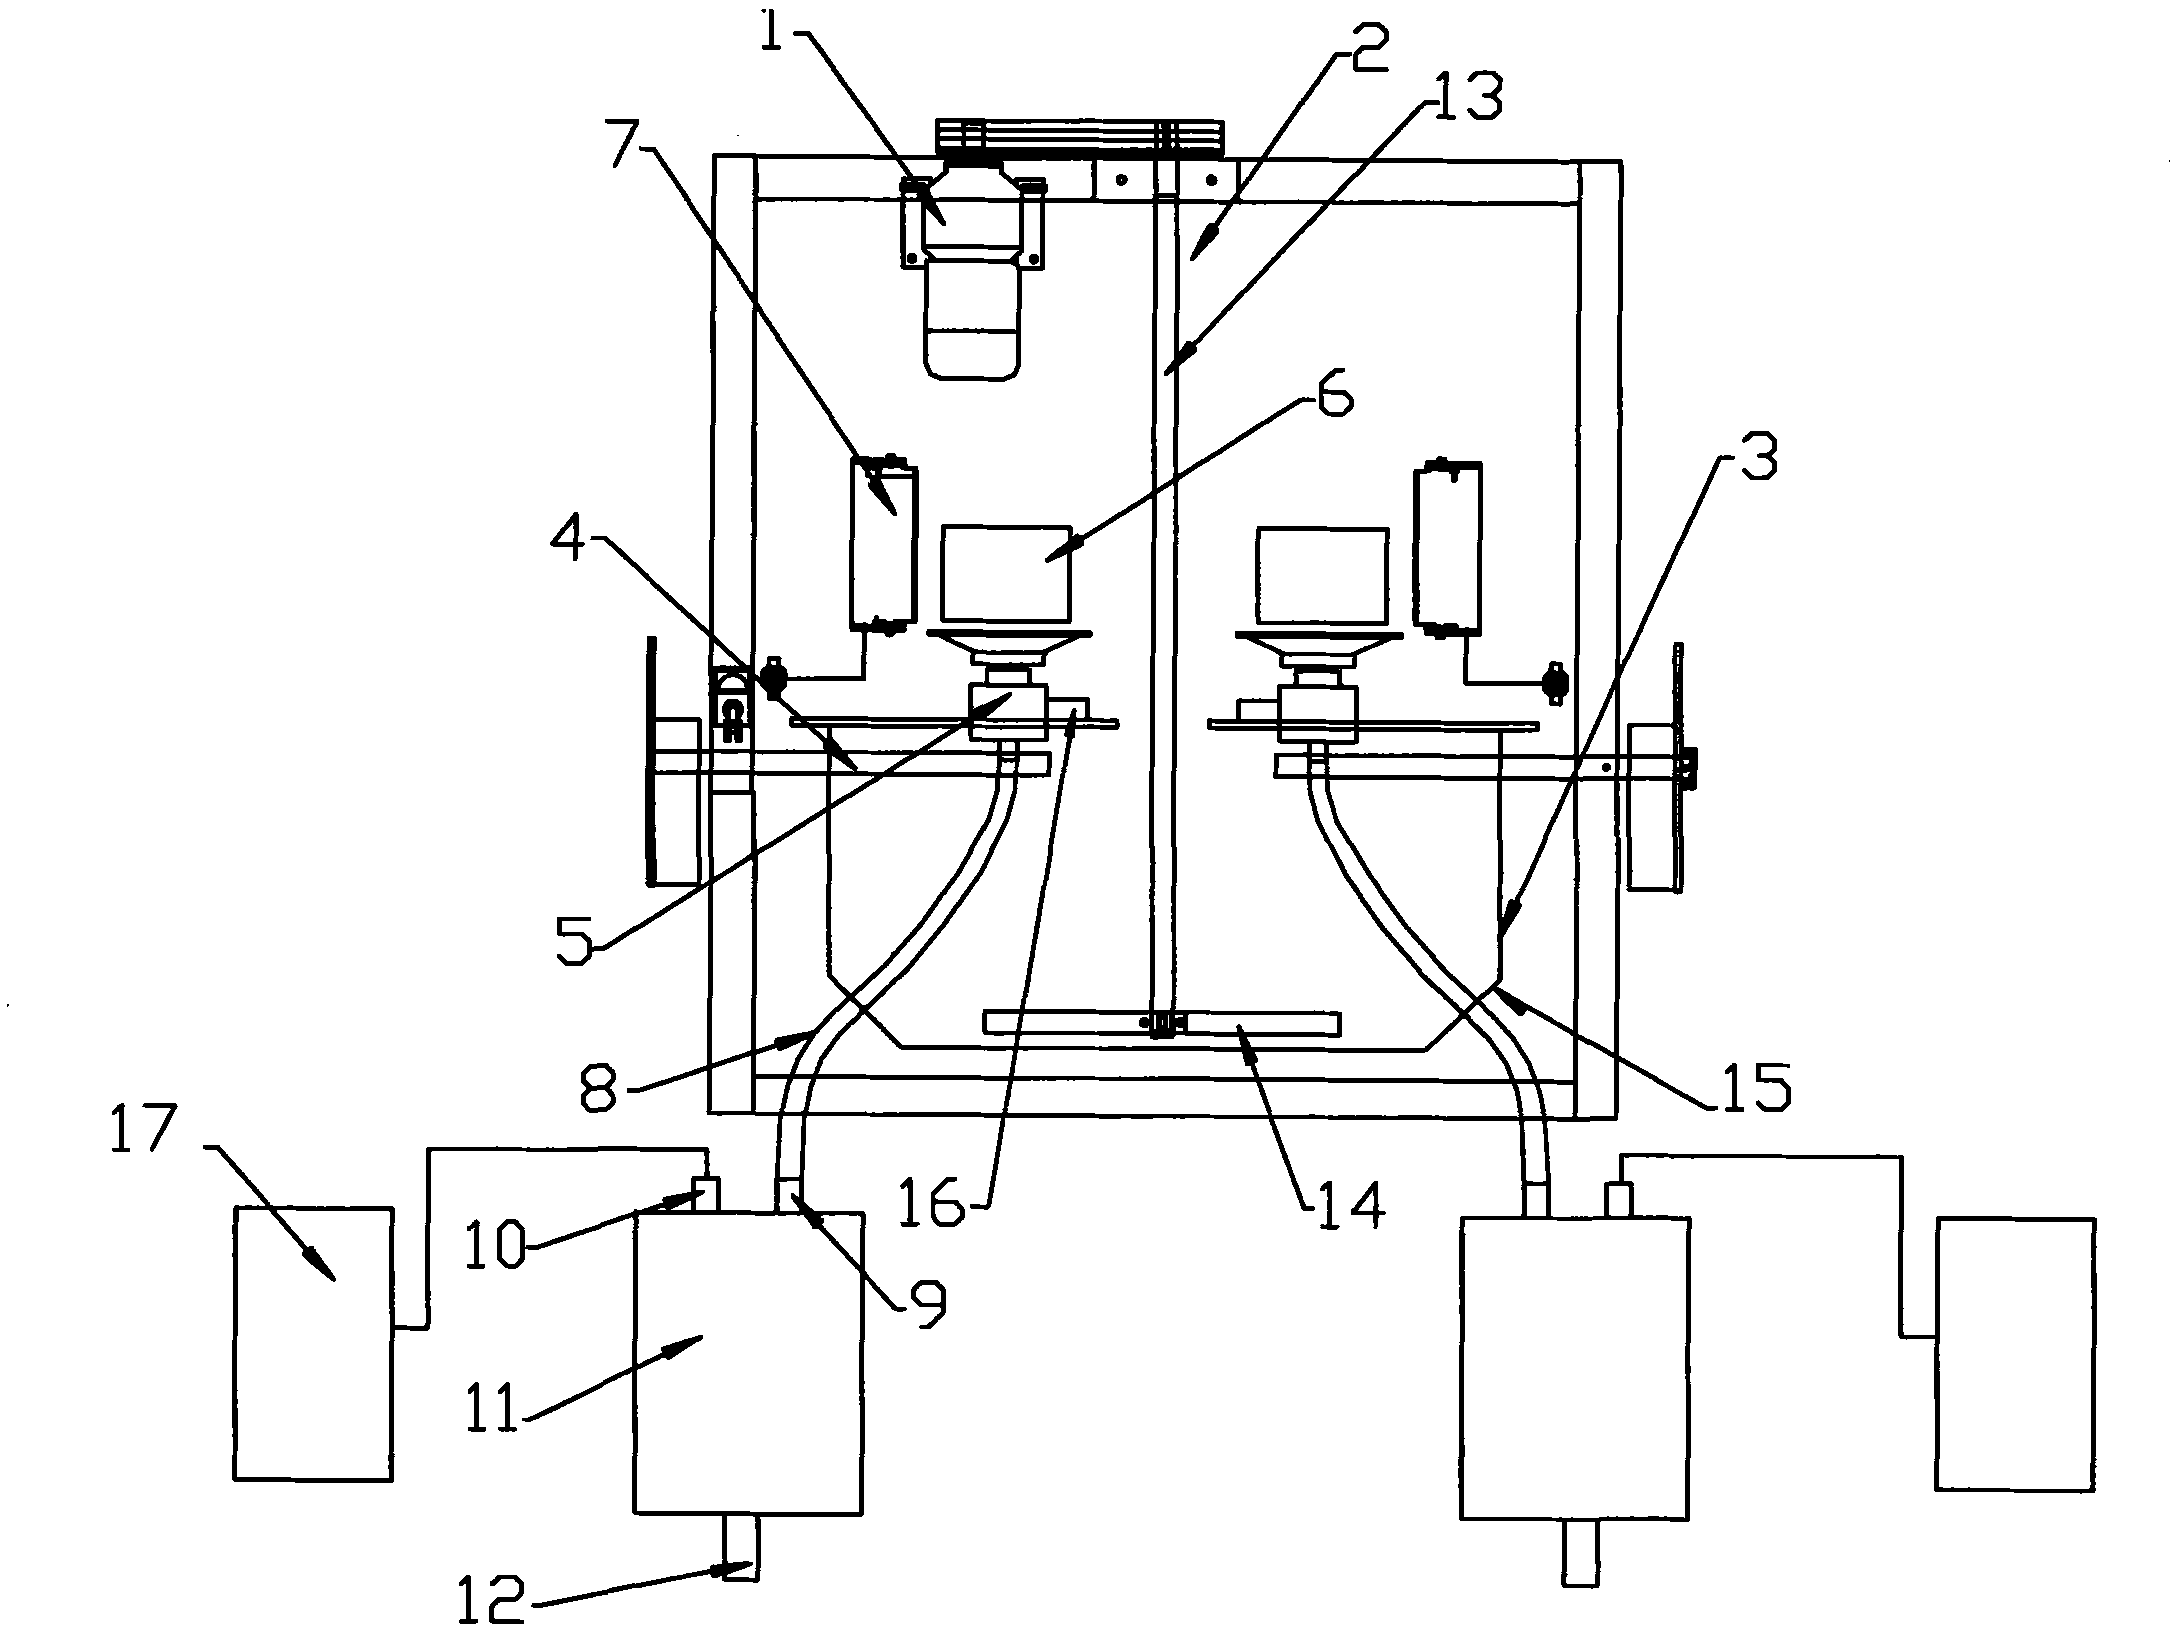 Insulating and heating riser forming device